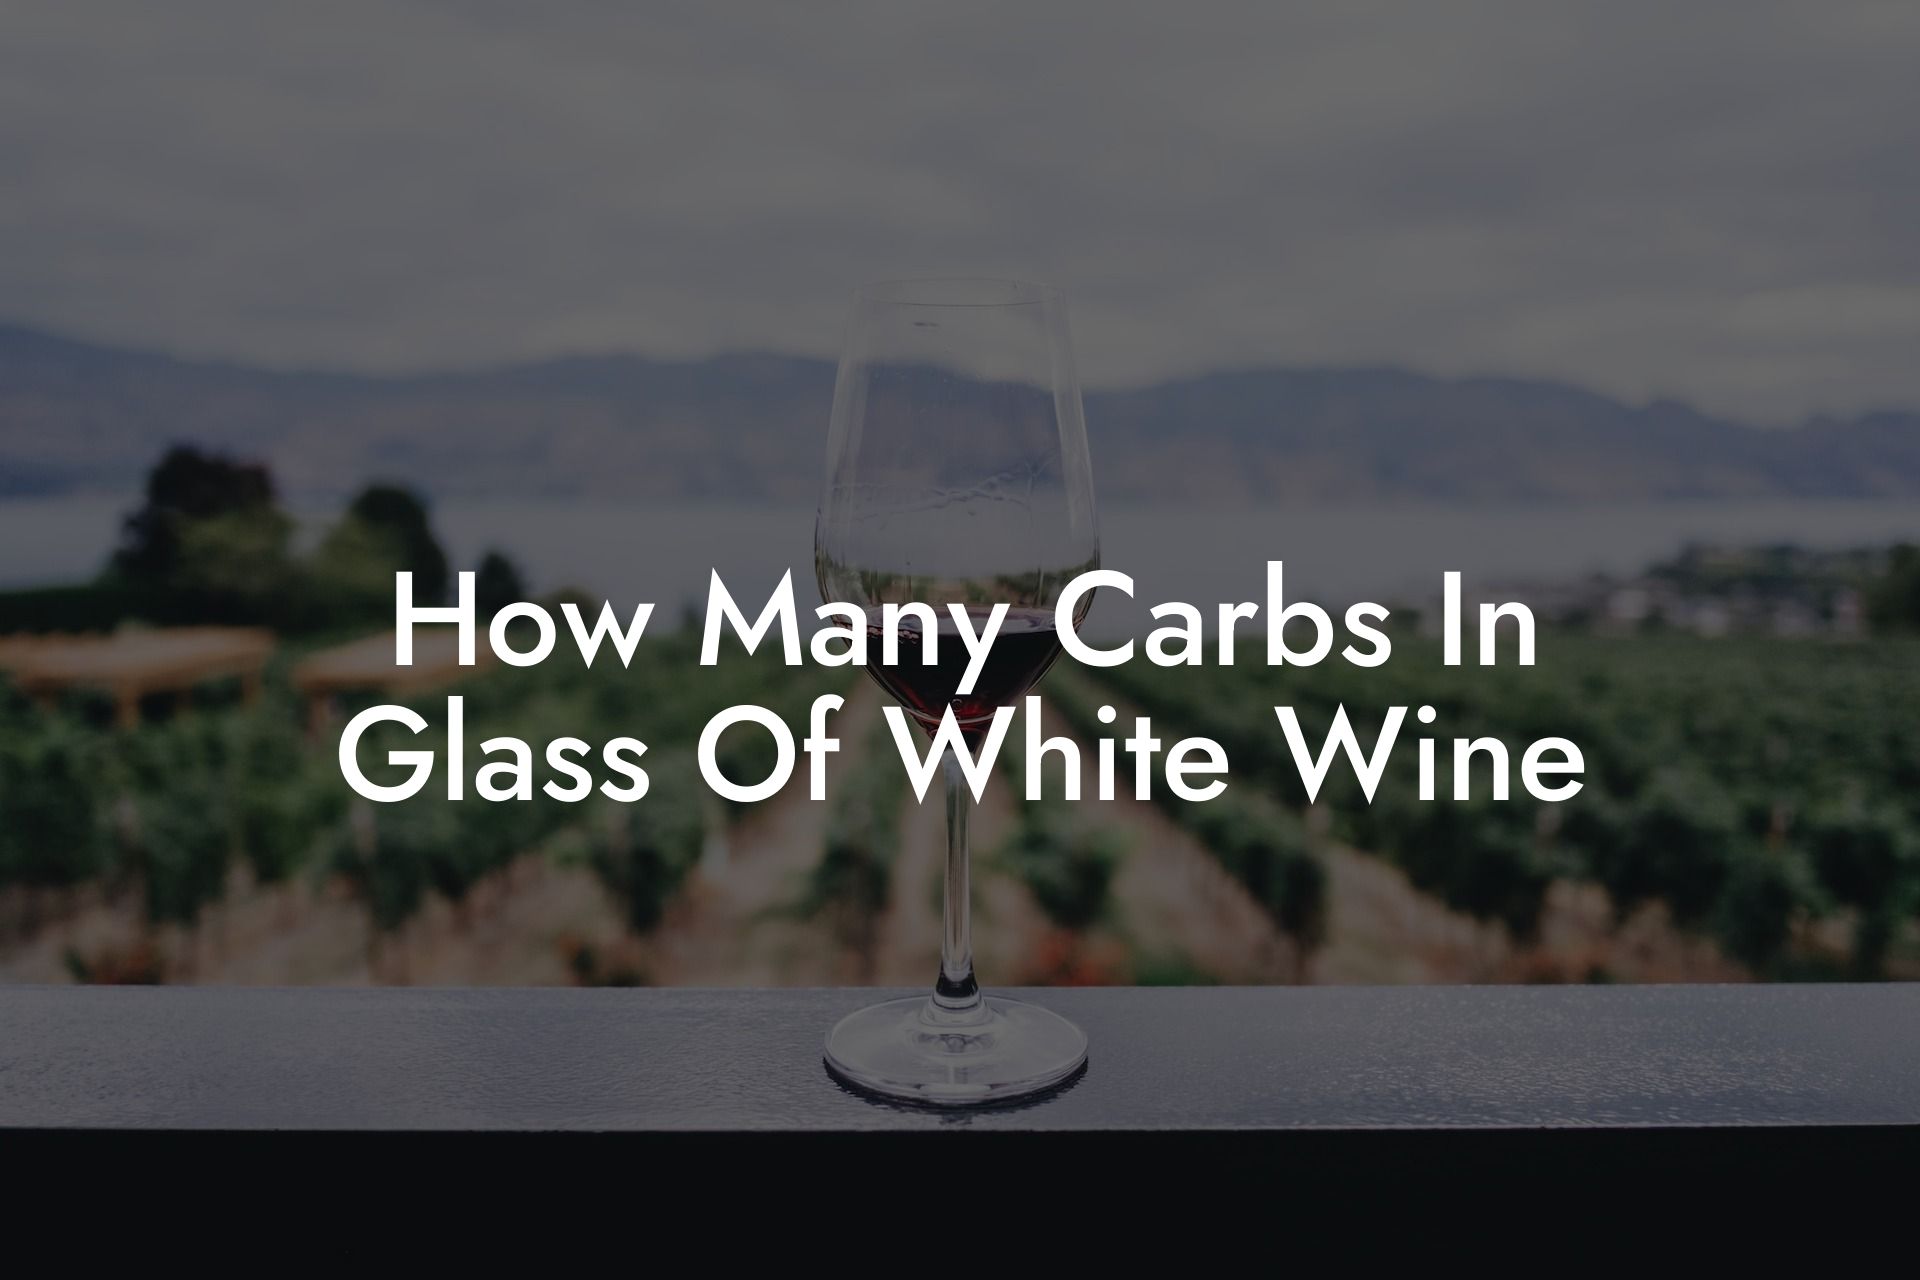 How Many Carbs In Glass Of White Wine